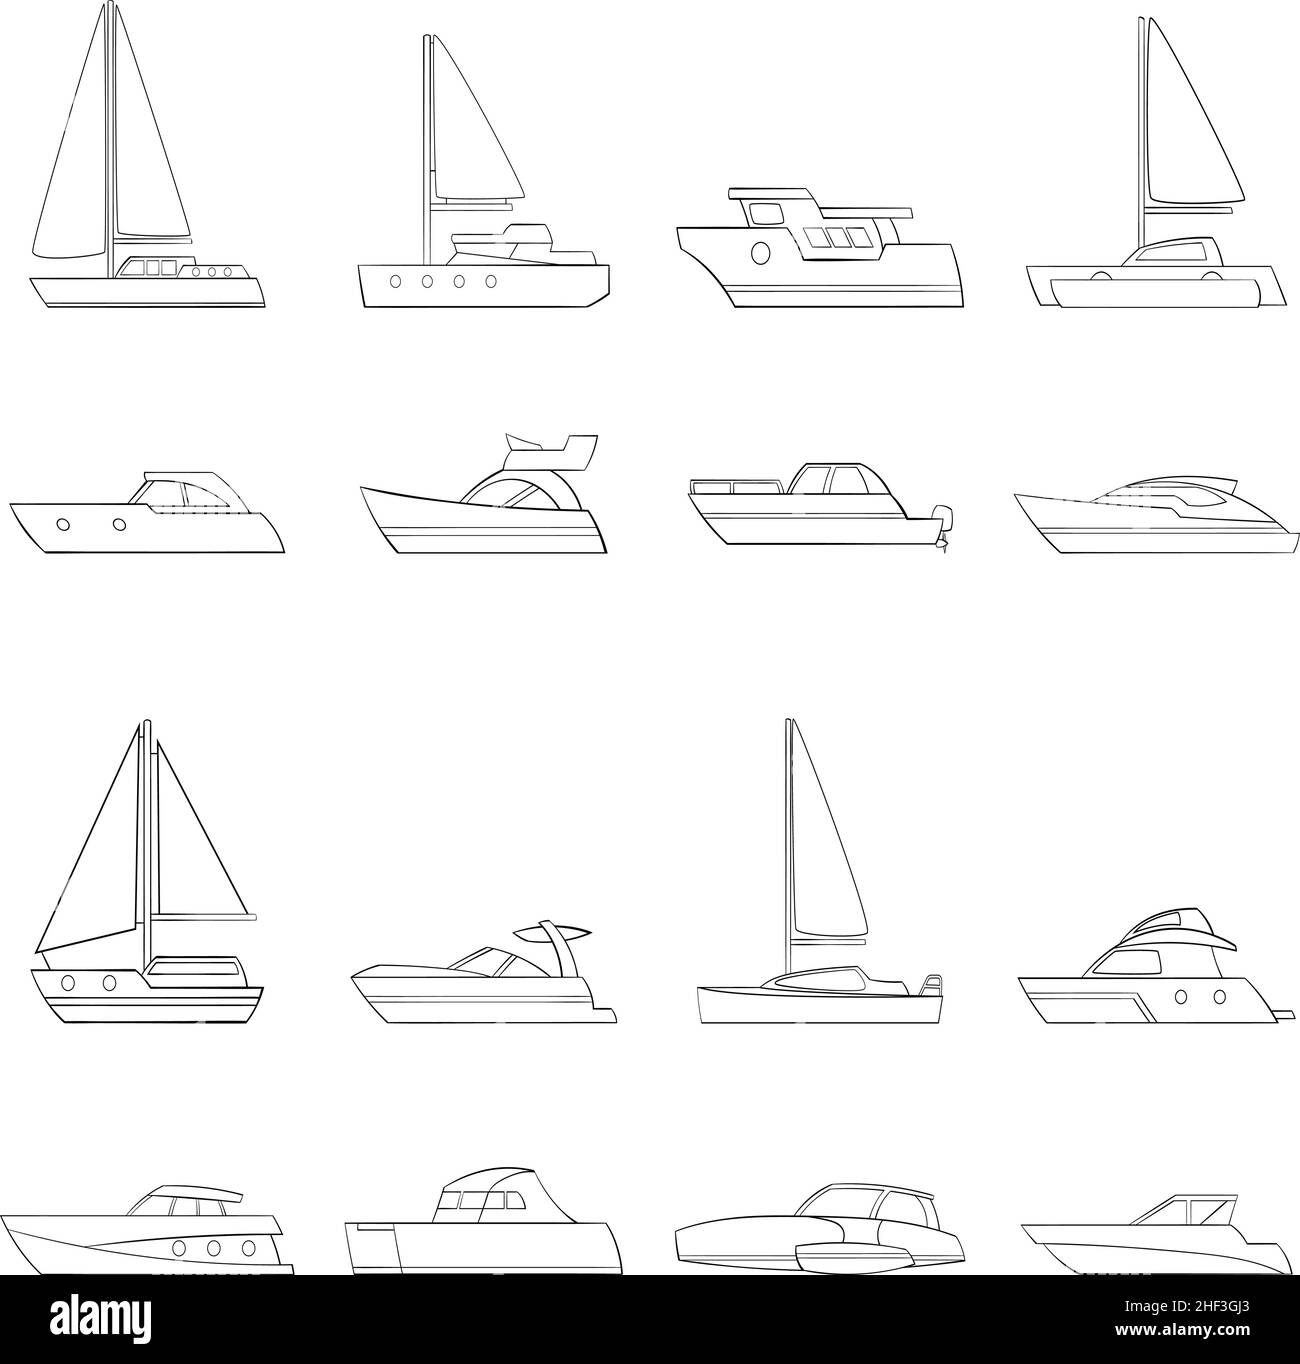 Yachts set icons in outline style isolated on white background Stock Vector